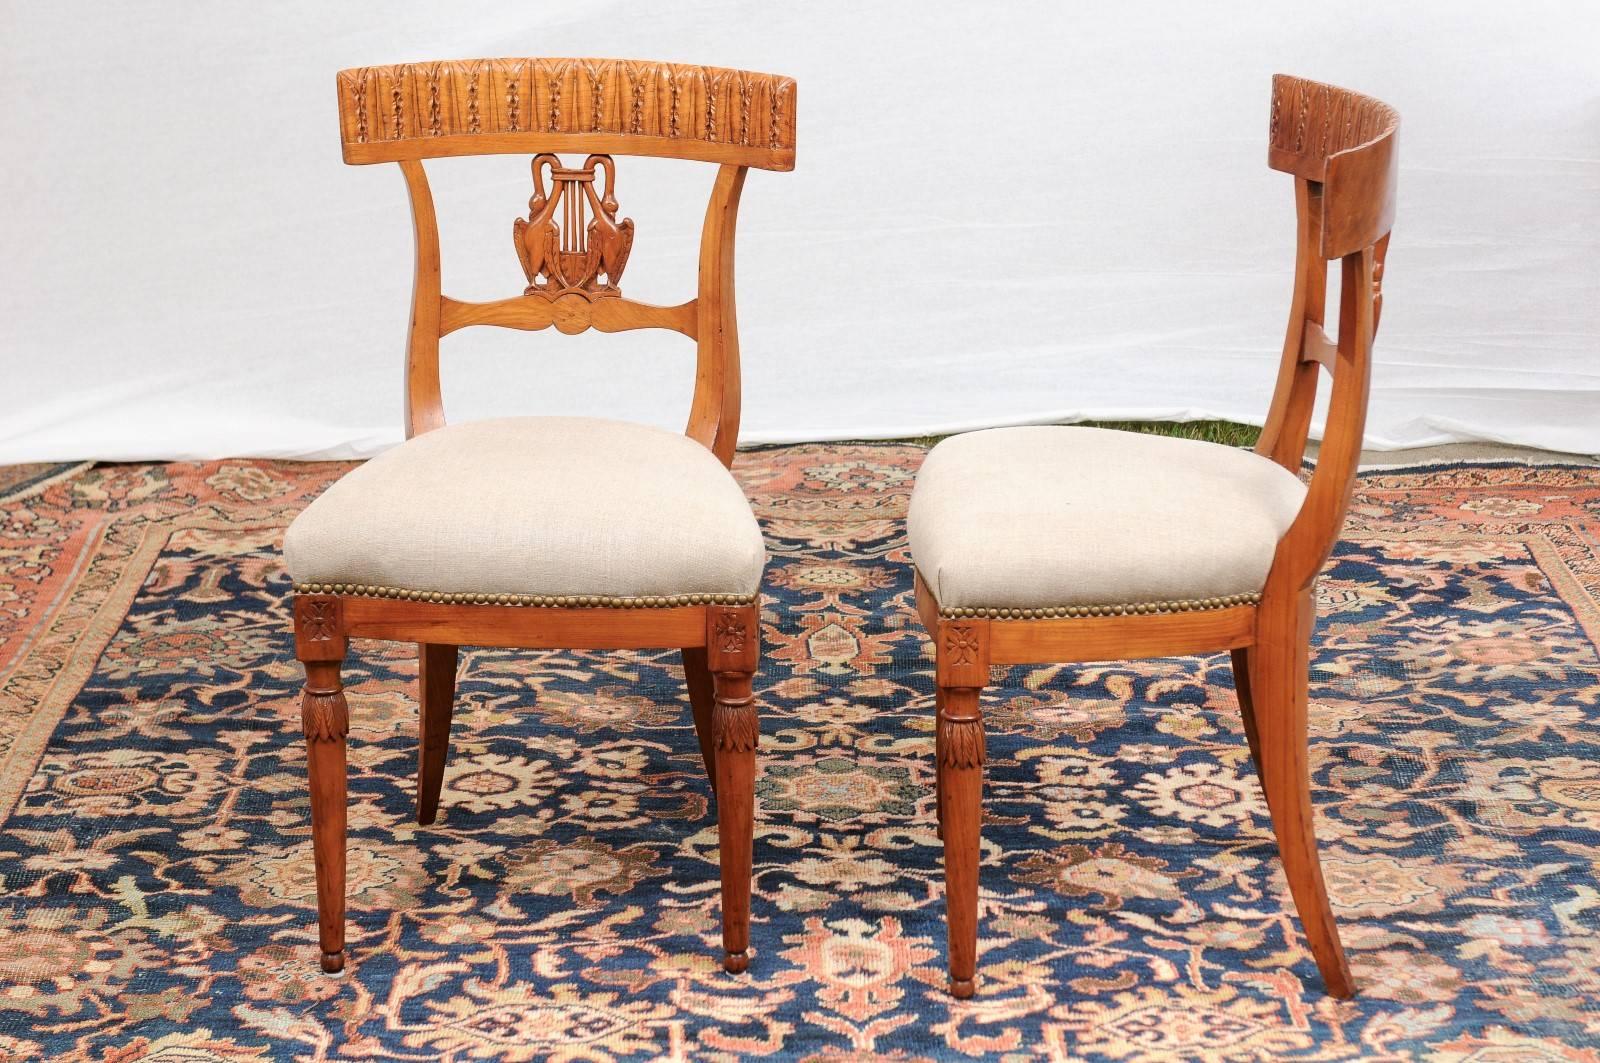 Pair of Italian Neoclassical Side Chairs with Swans and Lyre from the 1850s For Sale 5